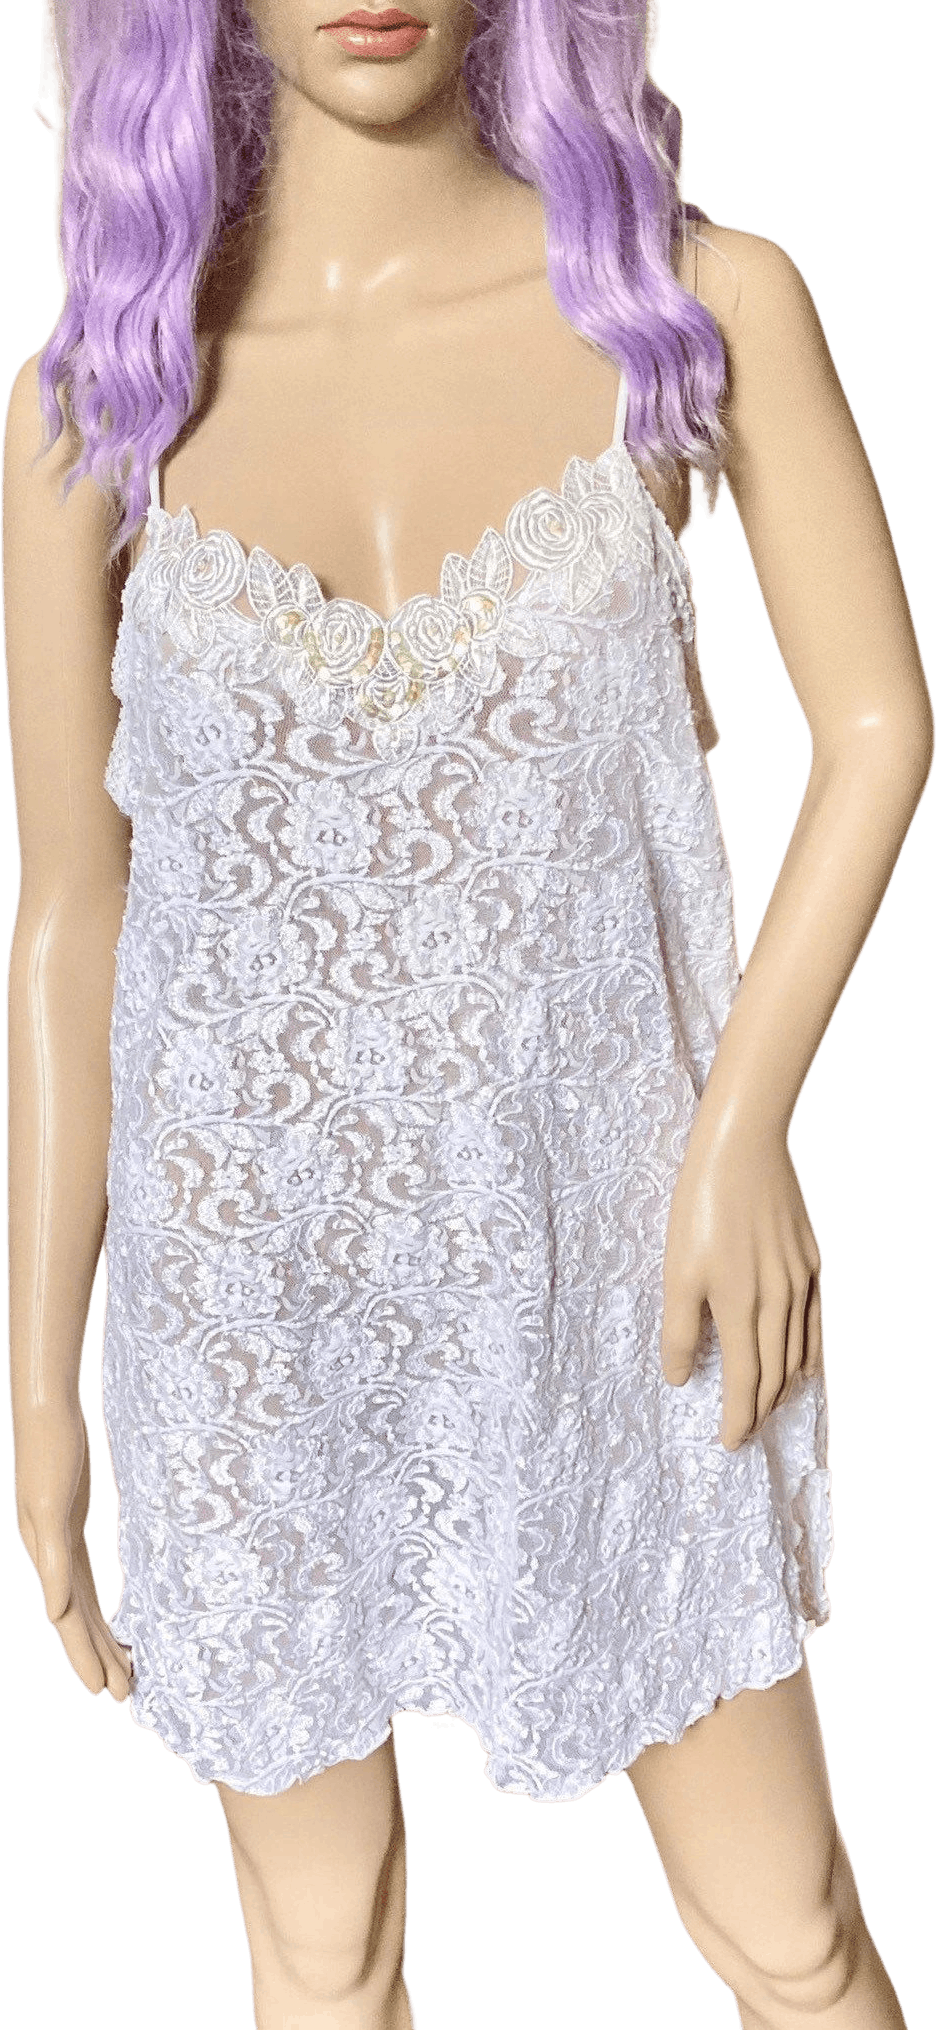 Vintage Sheer Lace Nightgown Lingerie Shop Thrilling